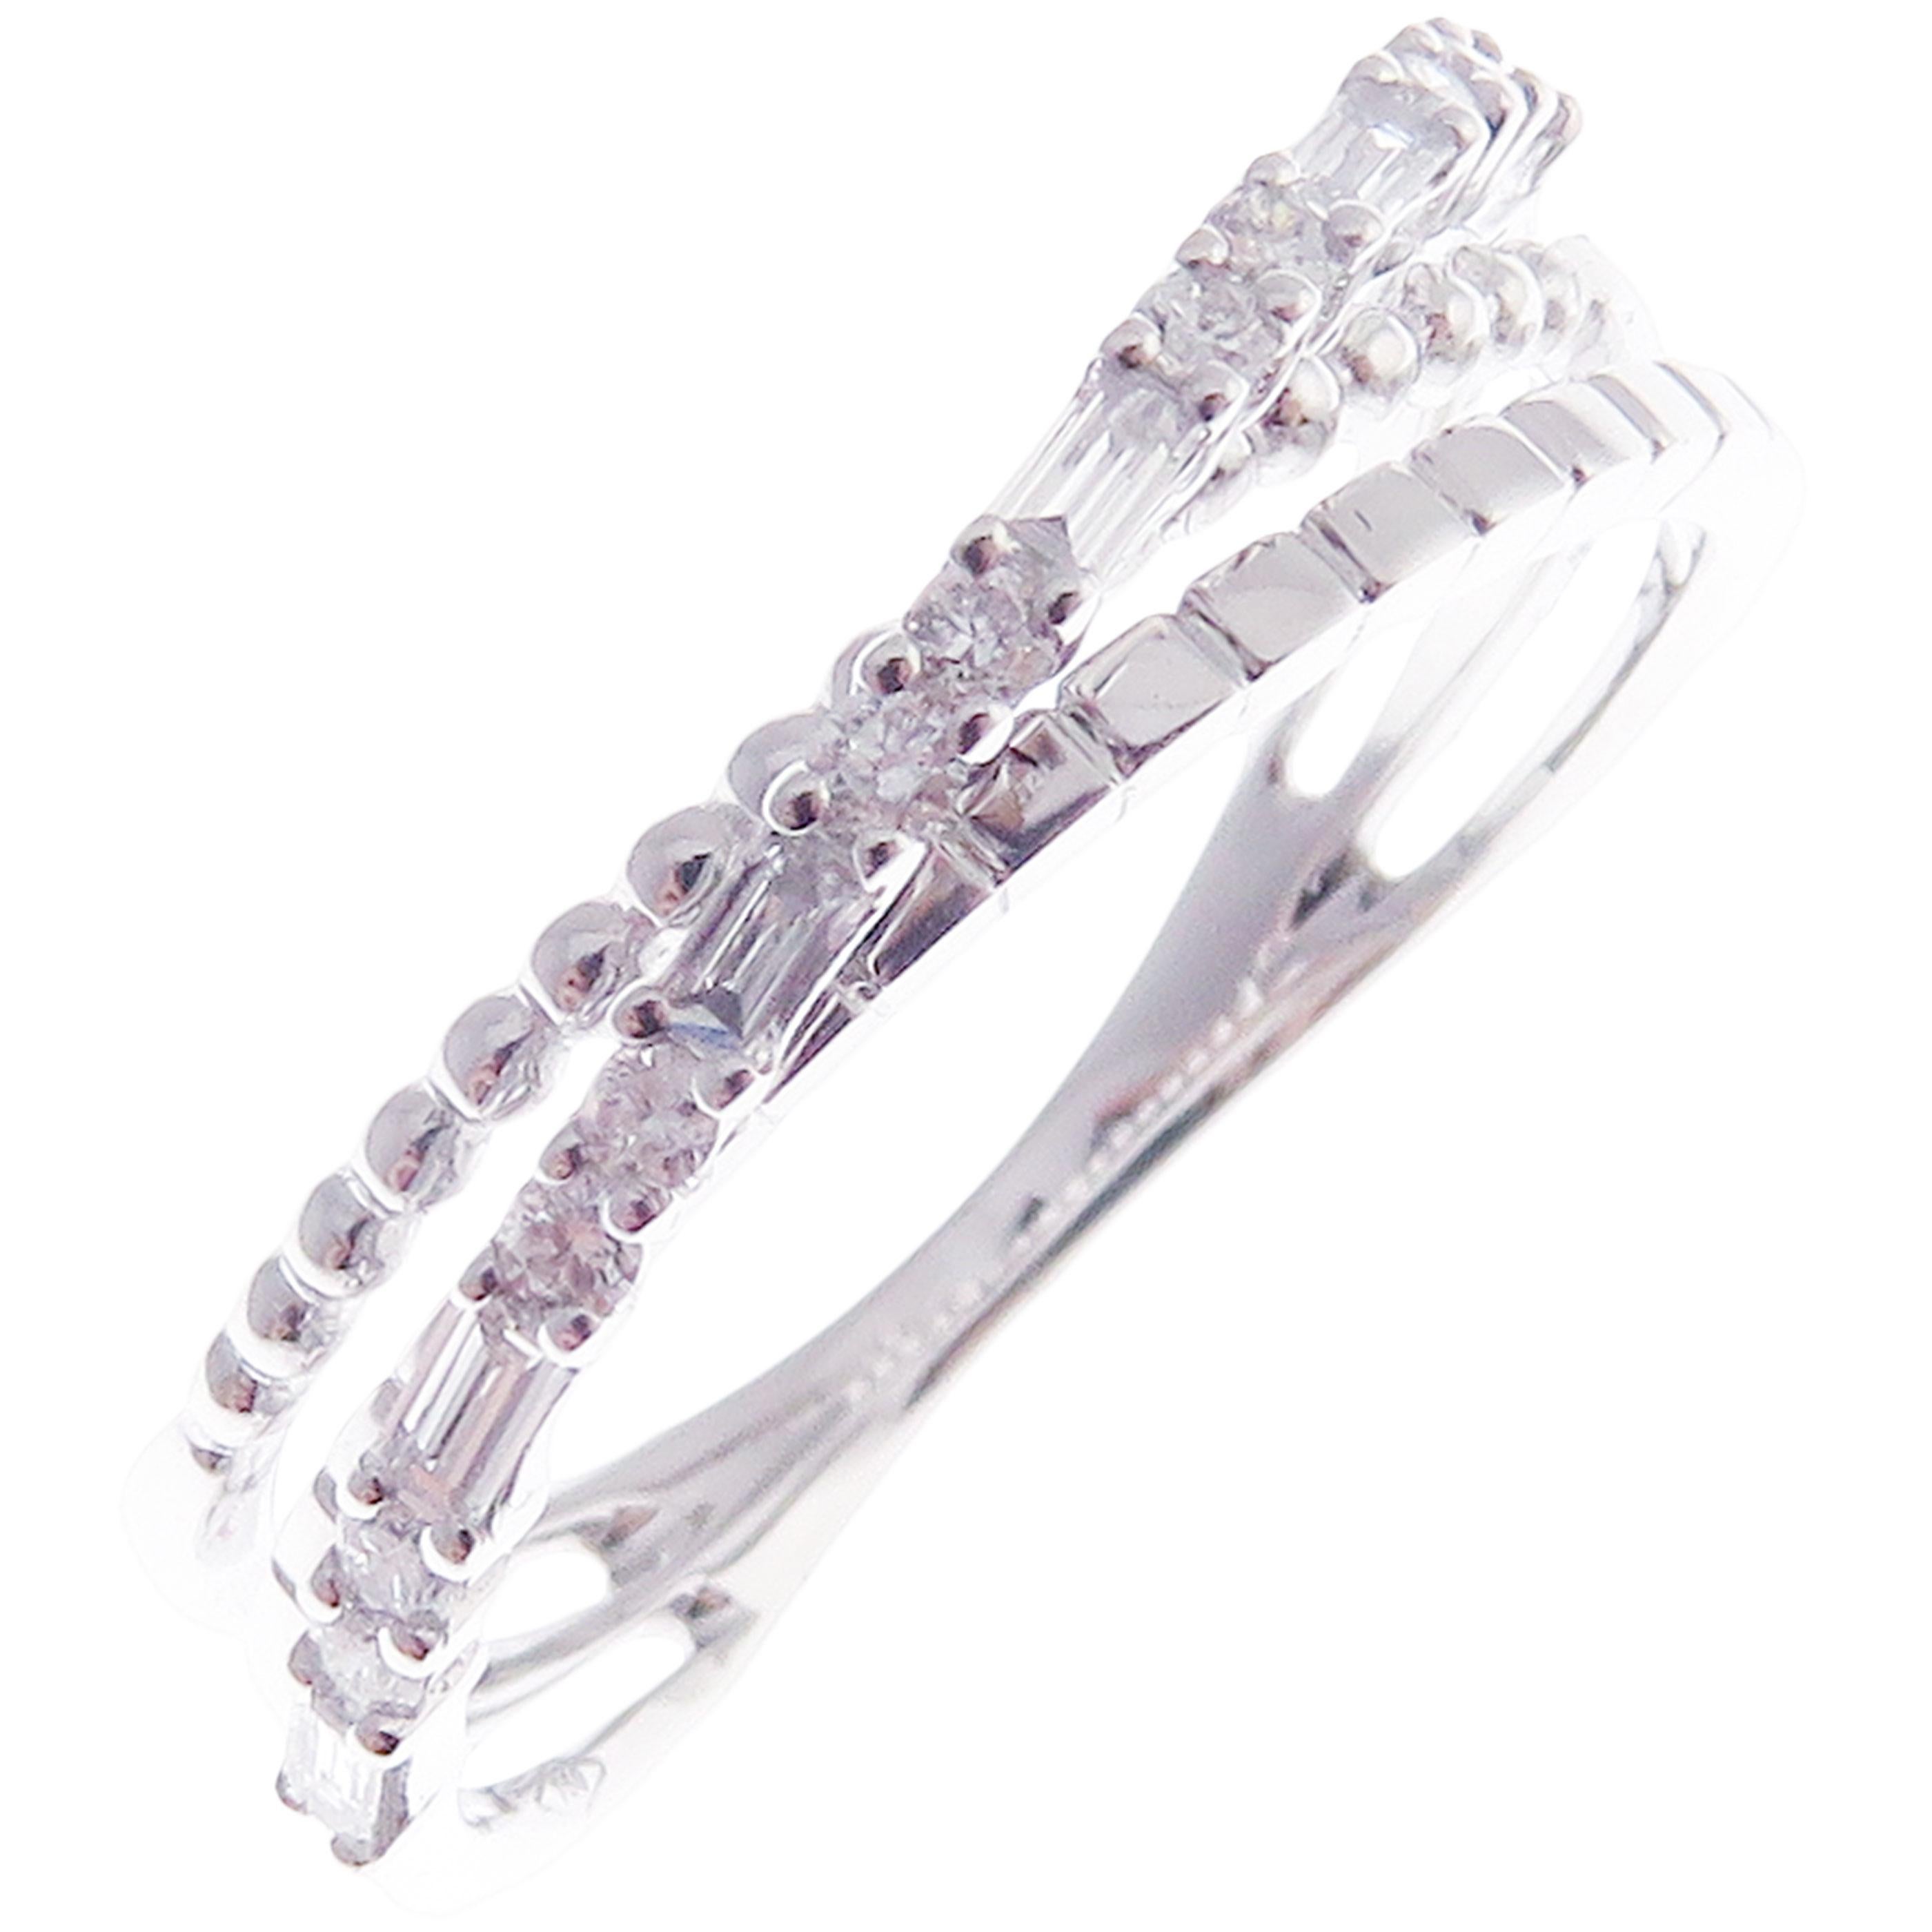 This trendy multi-layer X ring is crafted in 18-karat white gold, featuring 10 round white diamonds totaling of 0.11 carats and 6 baguette white diamonds totaling of 0.15 carats.
Approximate total weight 2.89 grams.
Standard Ring size 7
SI-G Quality